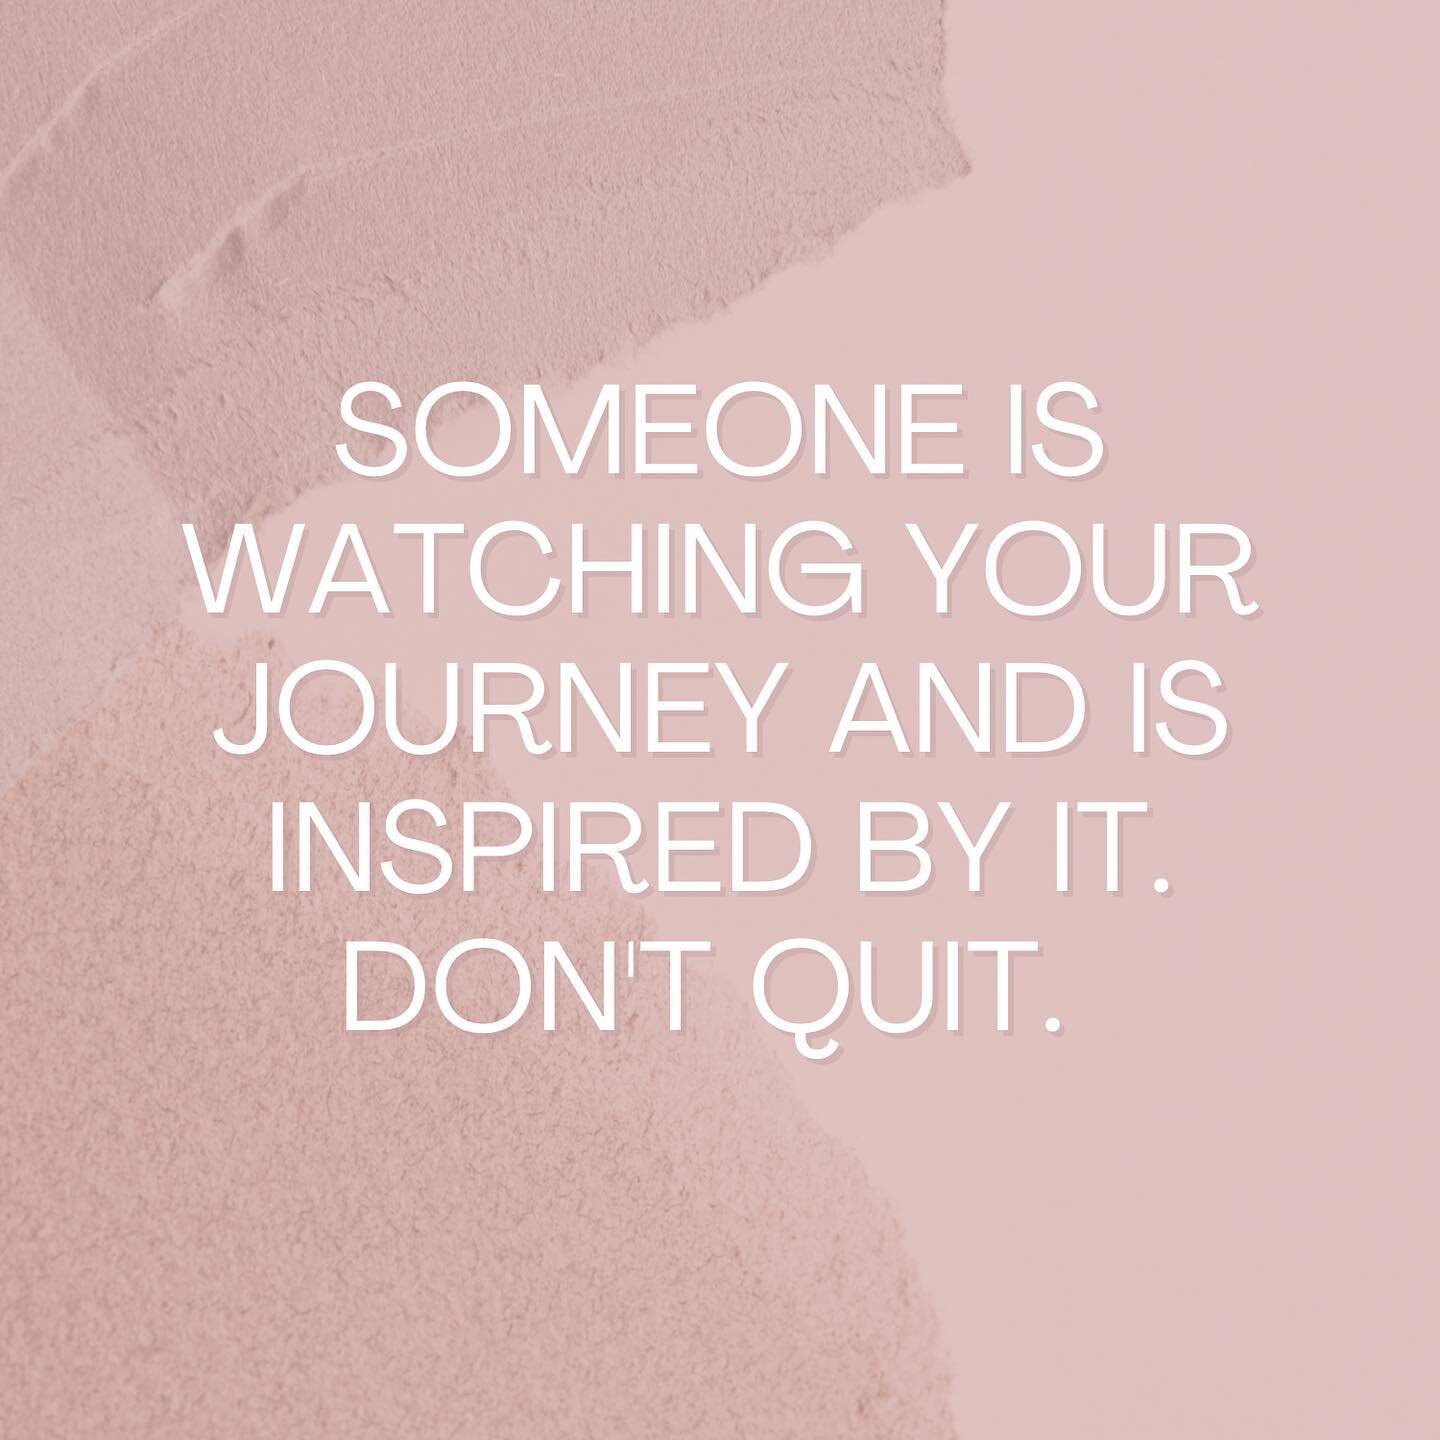 &quot;someone is watching your journey and is inspired by it. don't quit.&quot;